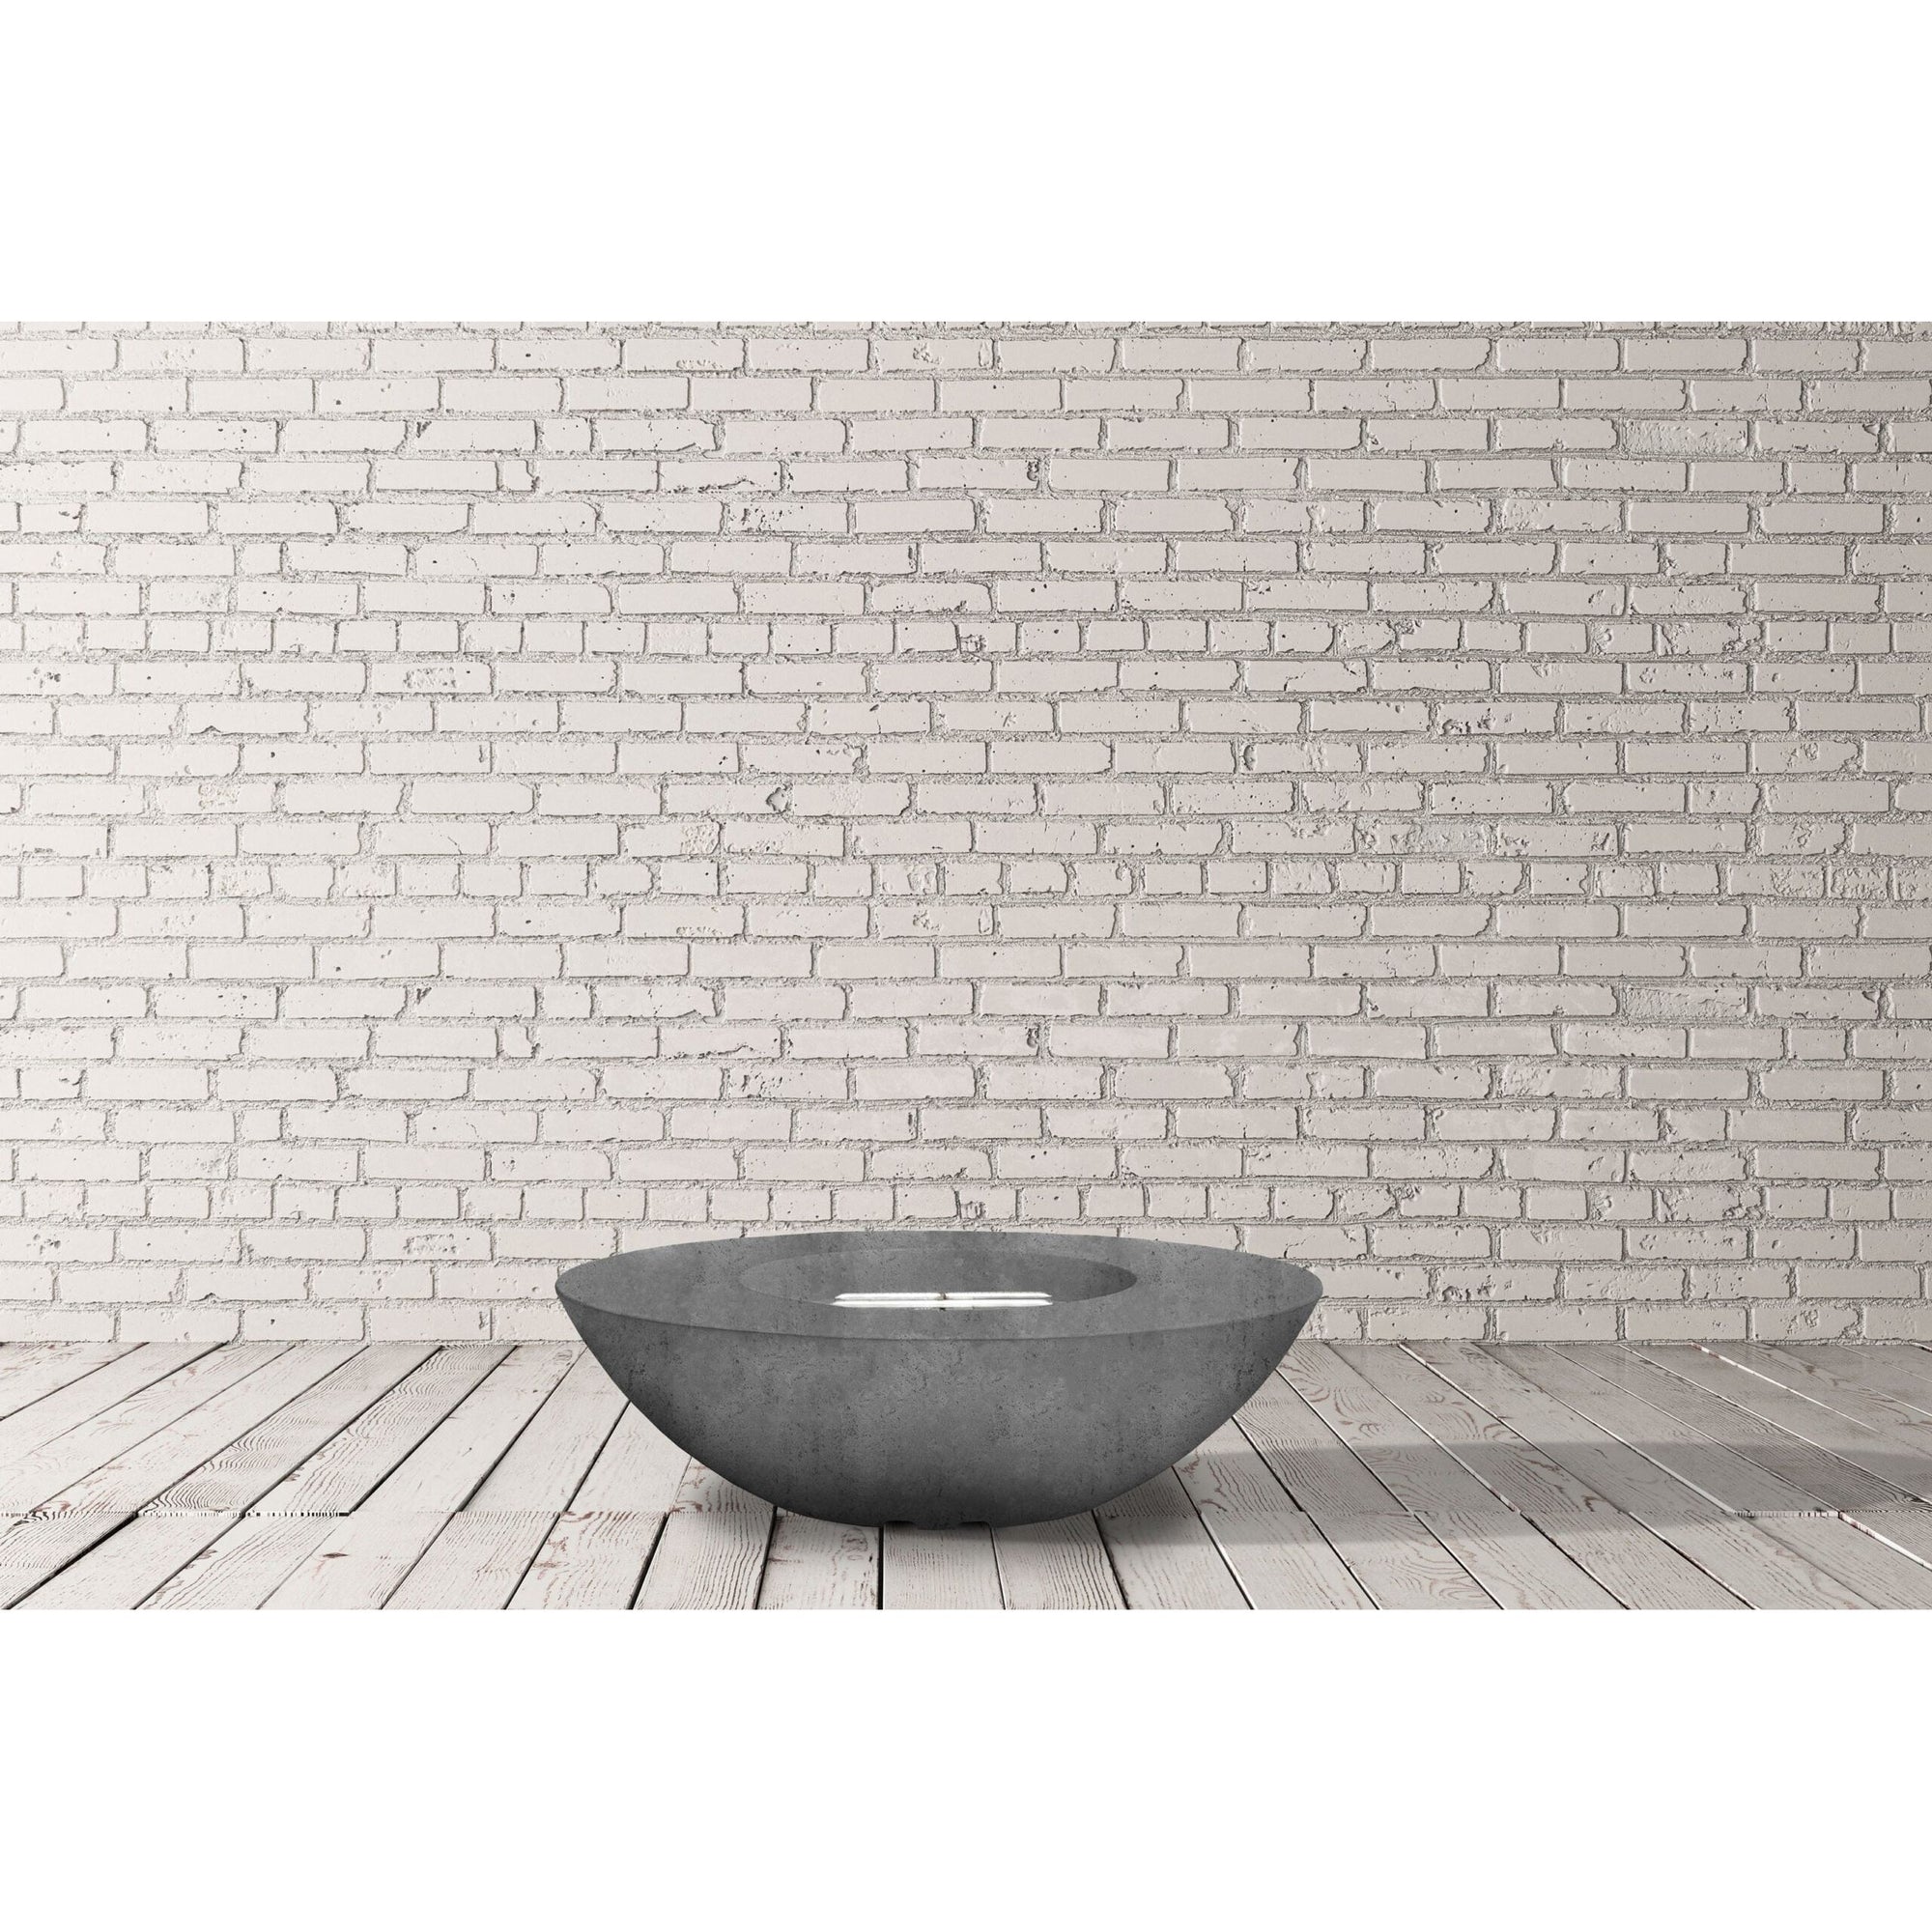 Ovale 60 Fire Table in GFRC Concrete by Prism Hardscapes - Majestic Fountains and More